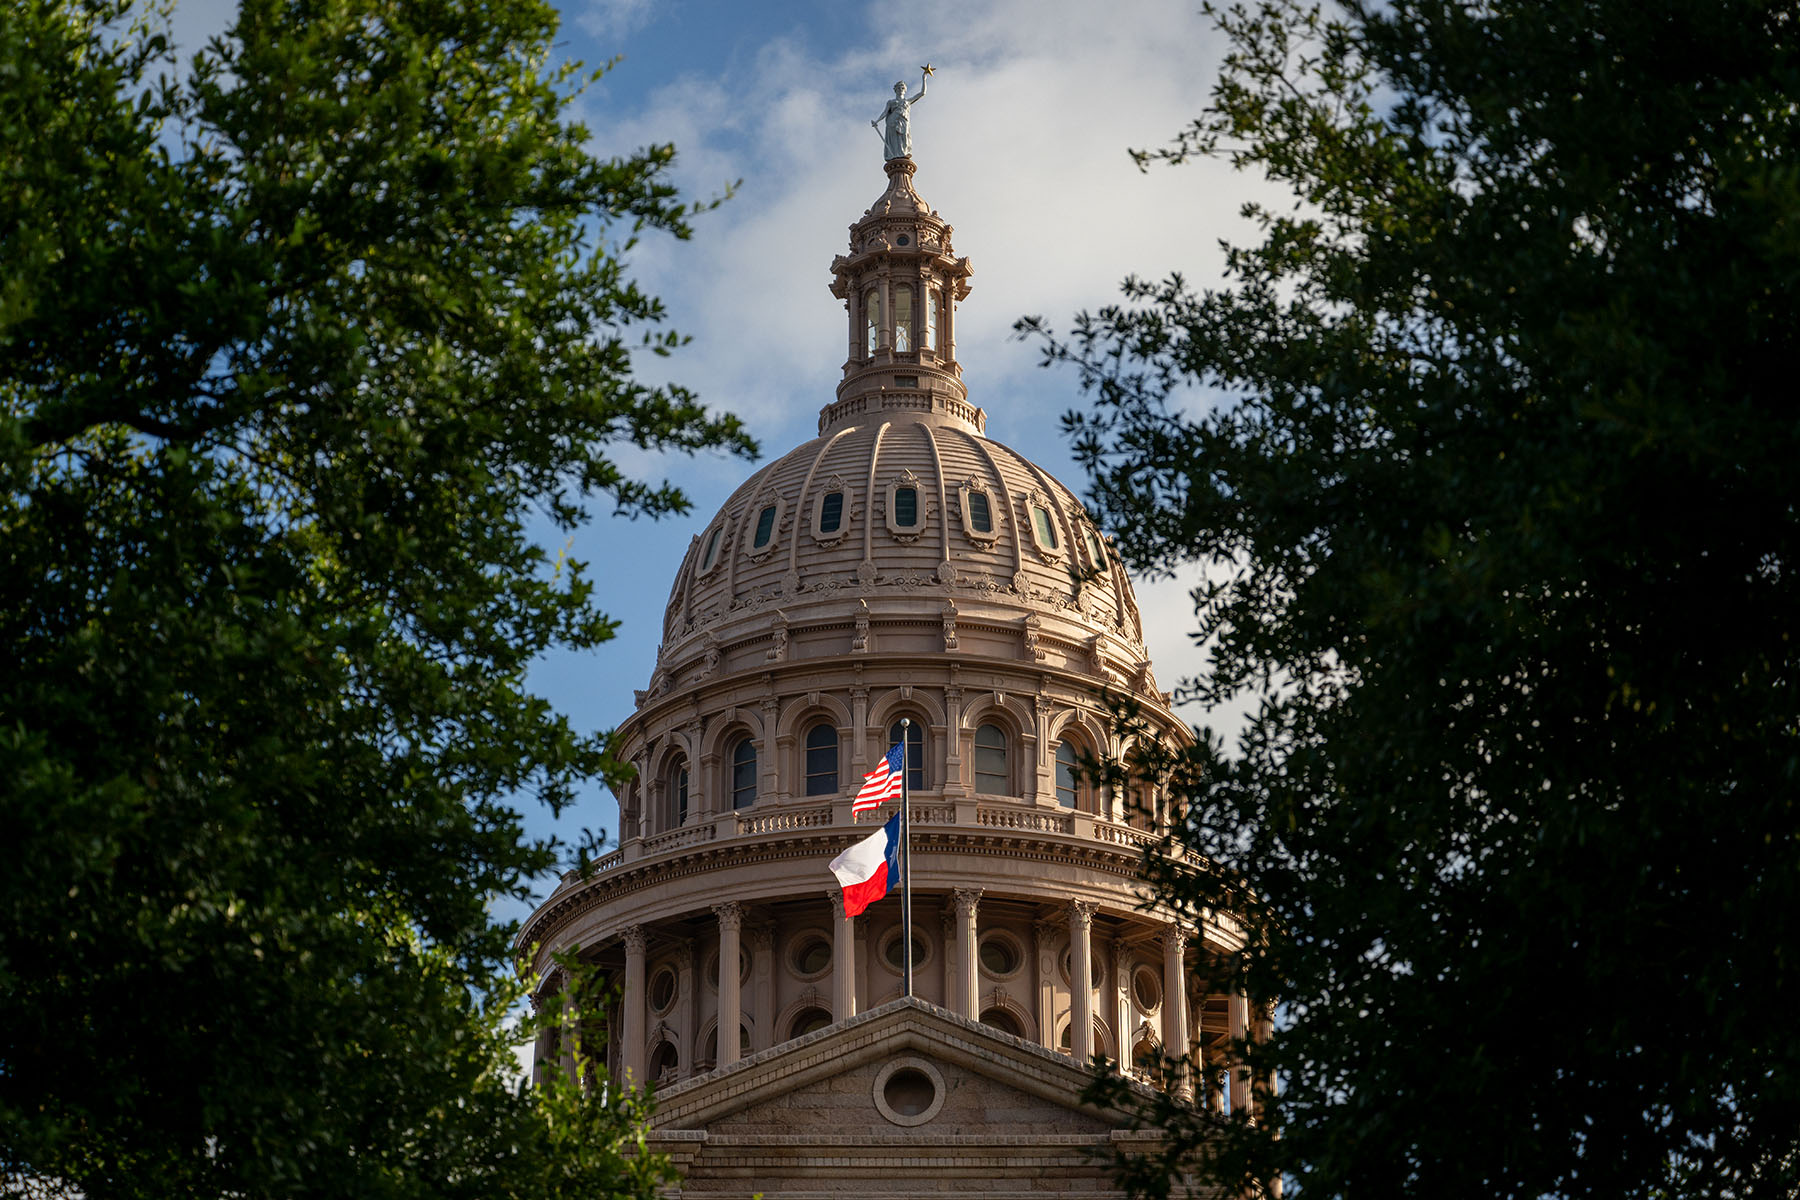 The exterior of the Texas State Capitol is seen in Austin, Texas.